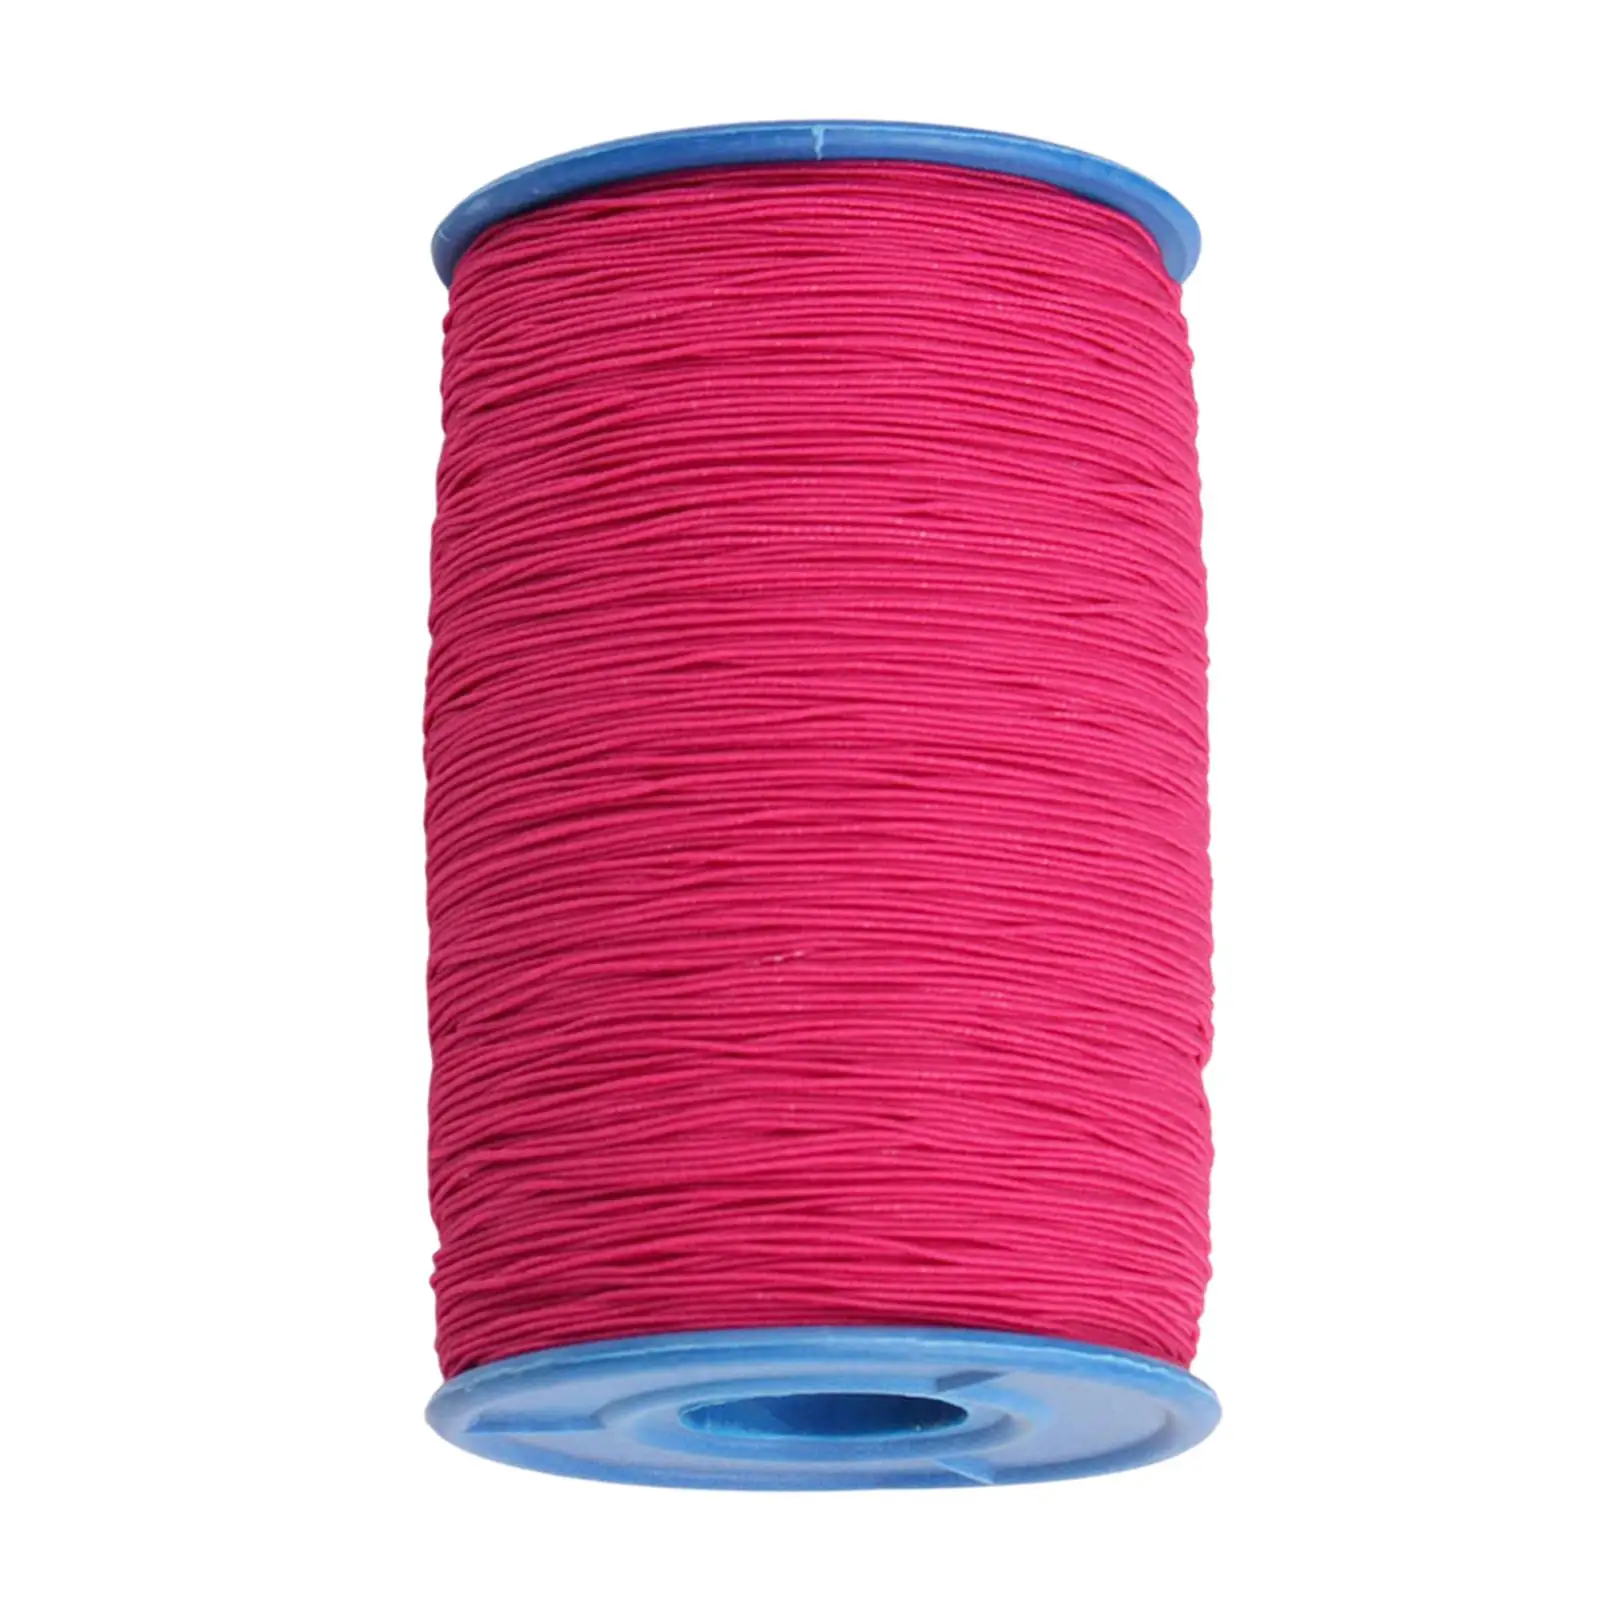 Rubber Elastic Rope Accessories 450M Knitting Elastic Band Clothing for Kayaks Bracelet